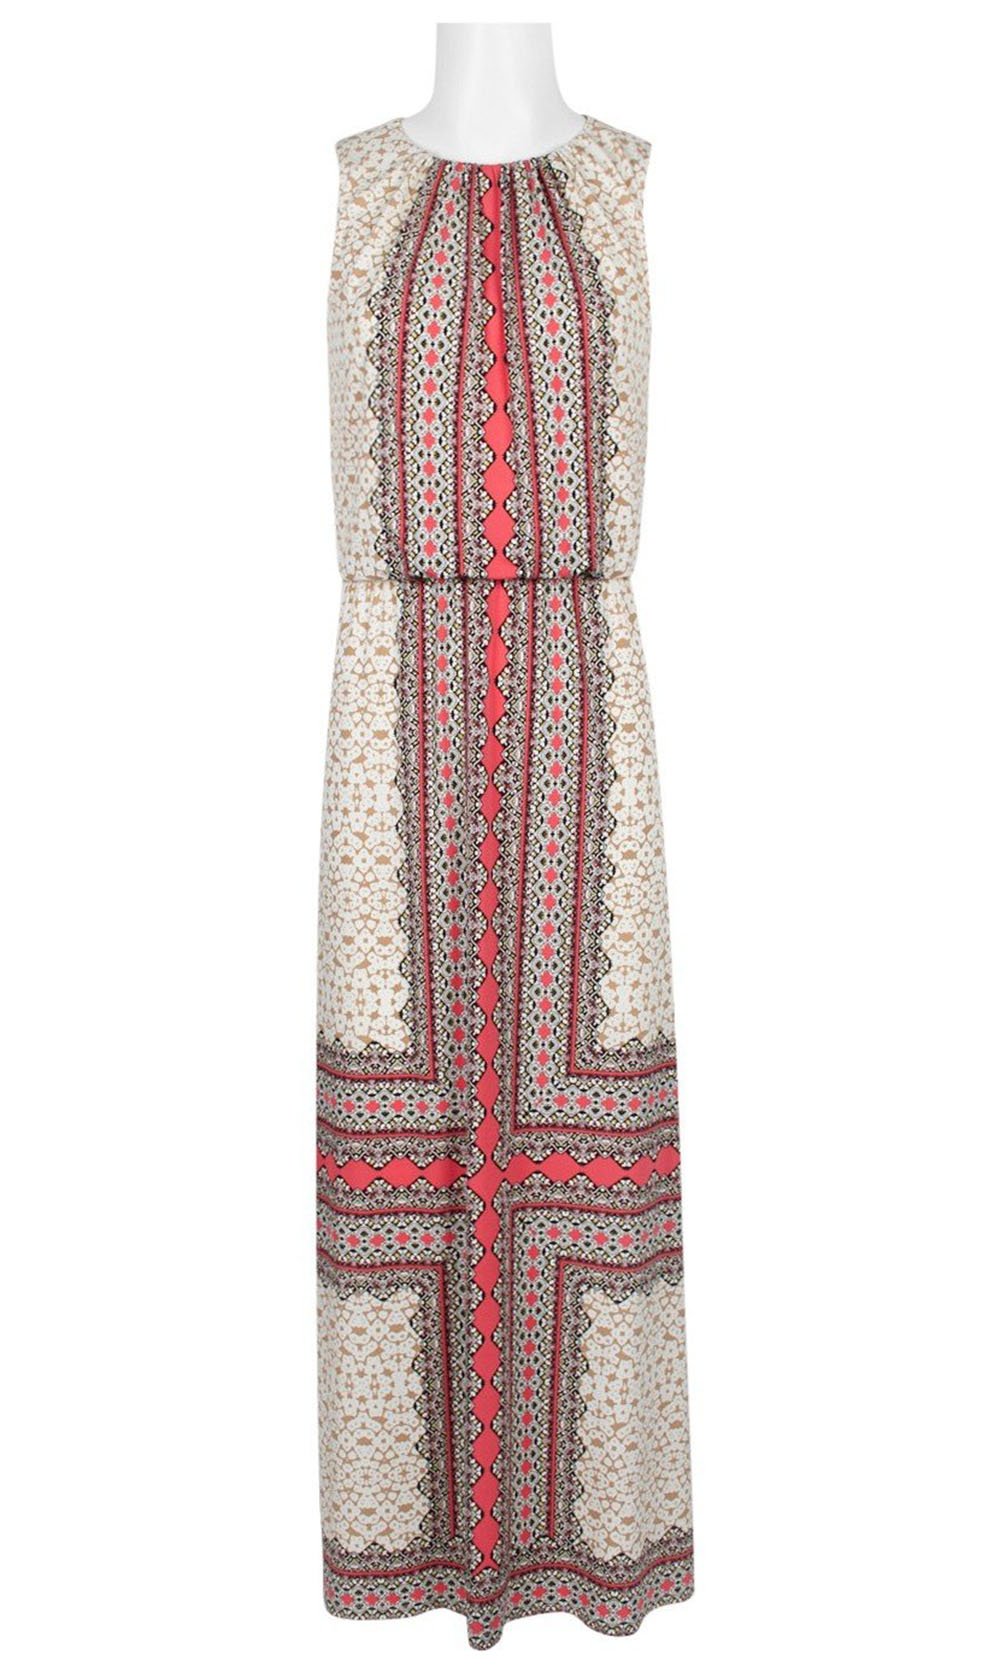 London Times - T4462M Sleeveless Paisley Print Blouson Maxi Dress In Pink and Brown